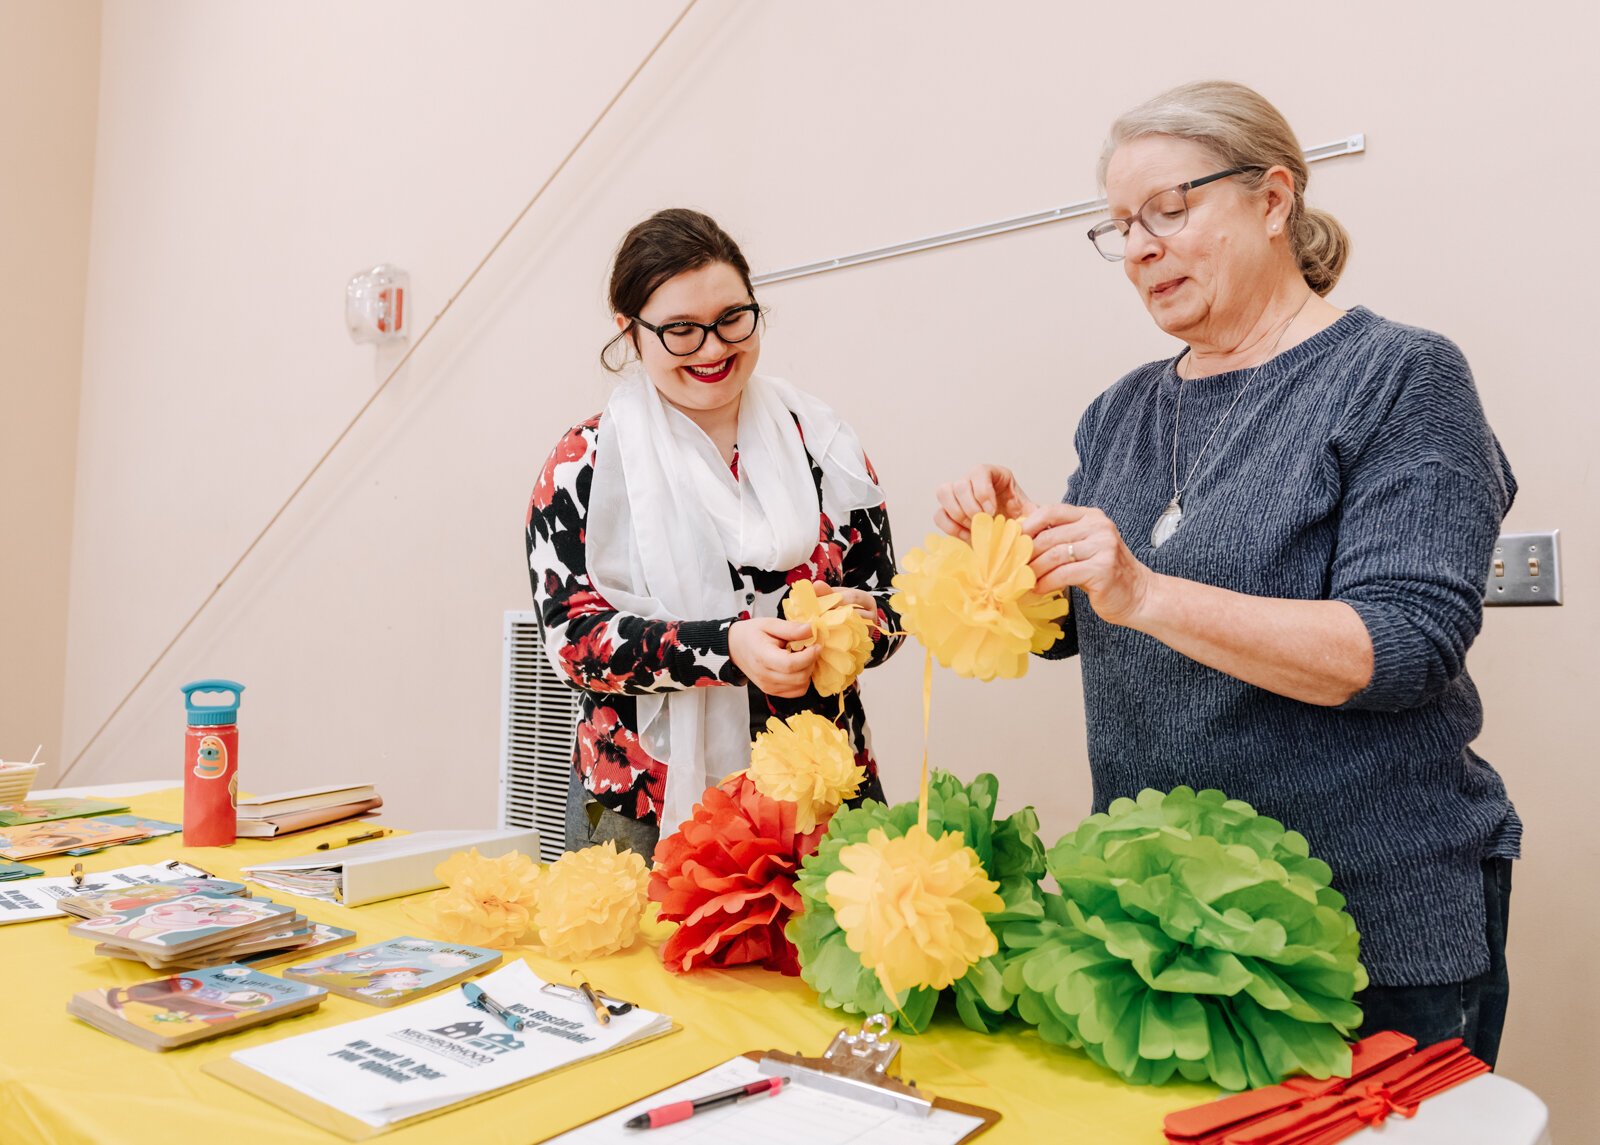 Bernadette Fellows, Community Engagement Planner with the City of Fort Wayne left, and Margaret Machlan, President of Harvester Neighborhood Association work together to decorate a table during the Fall Fest event at Harvester Missionary Church.